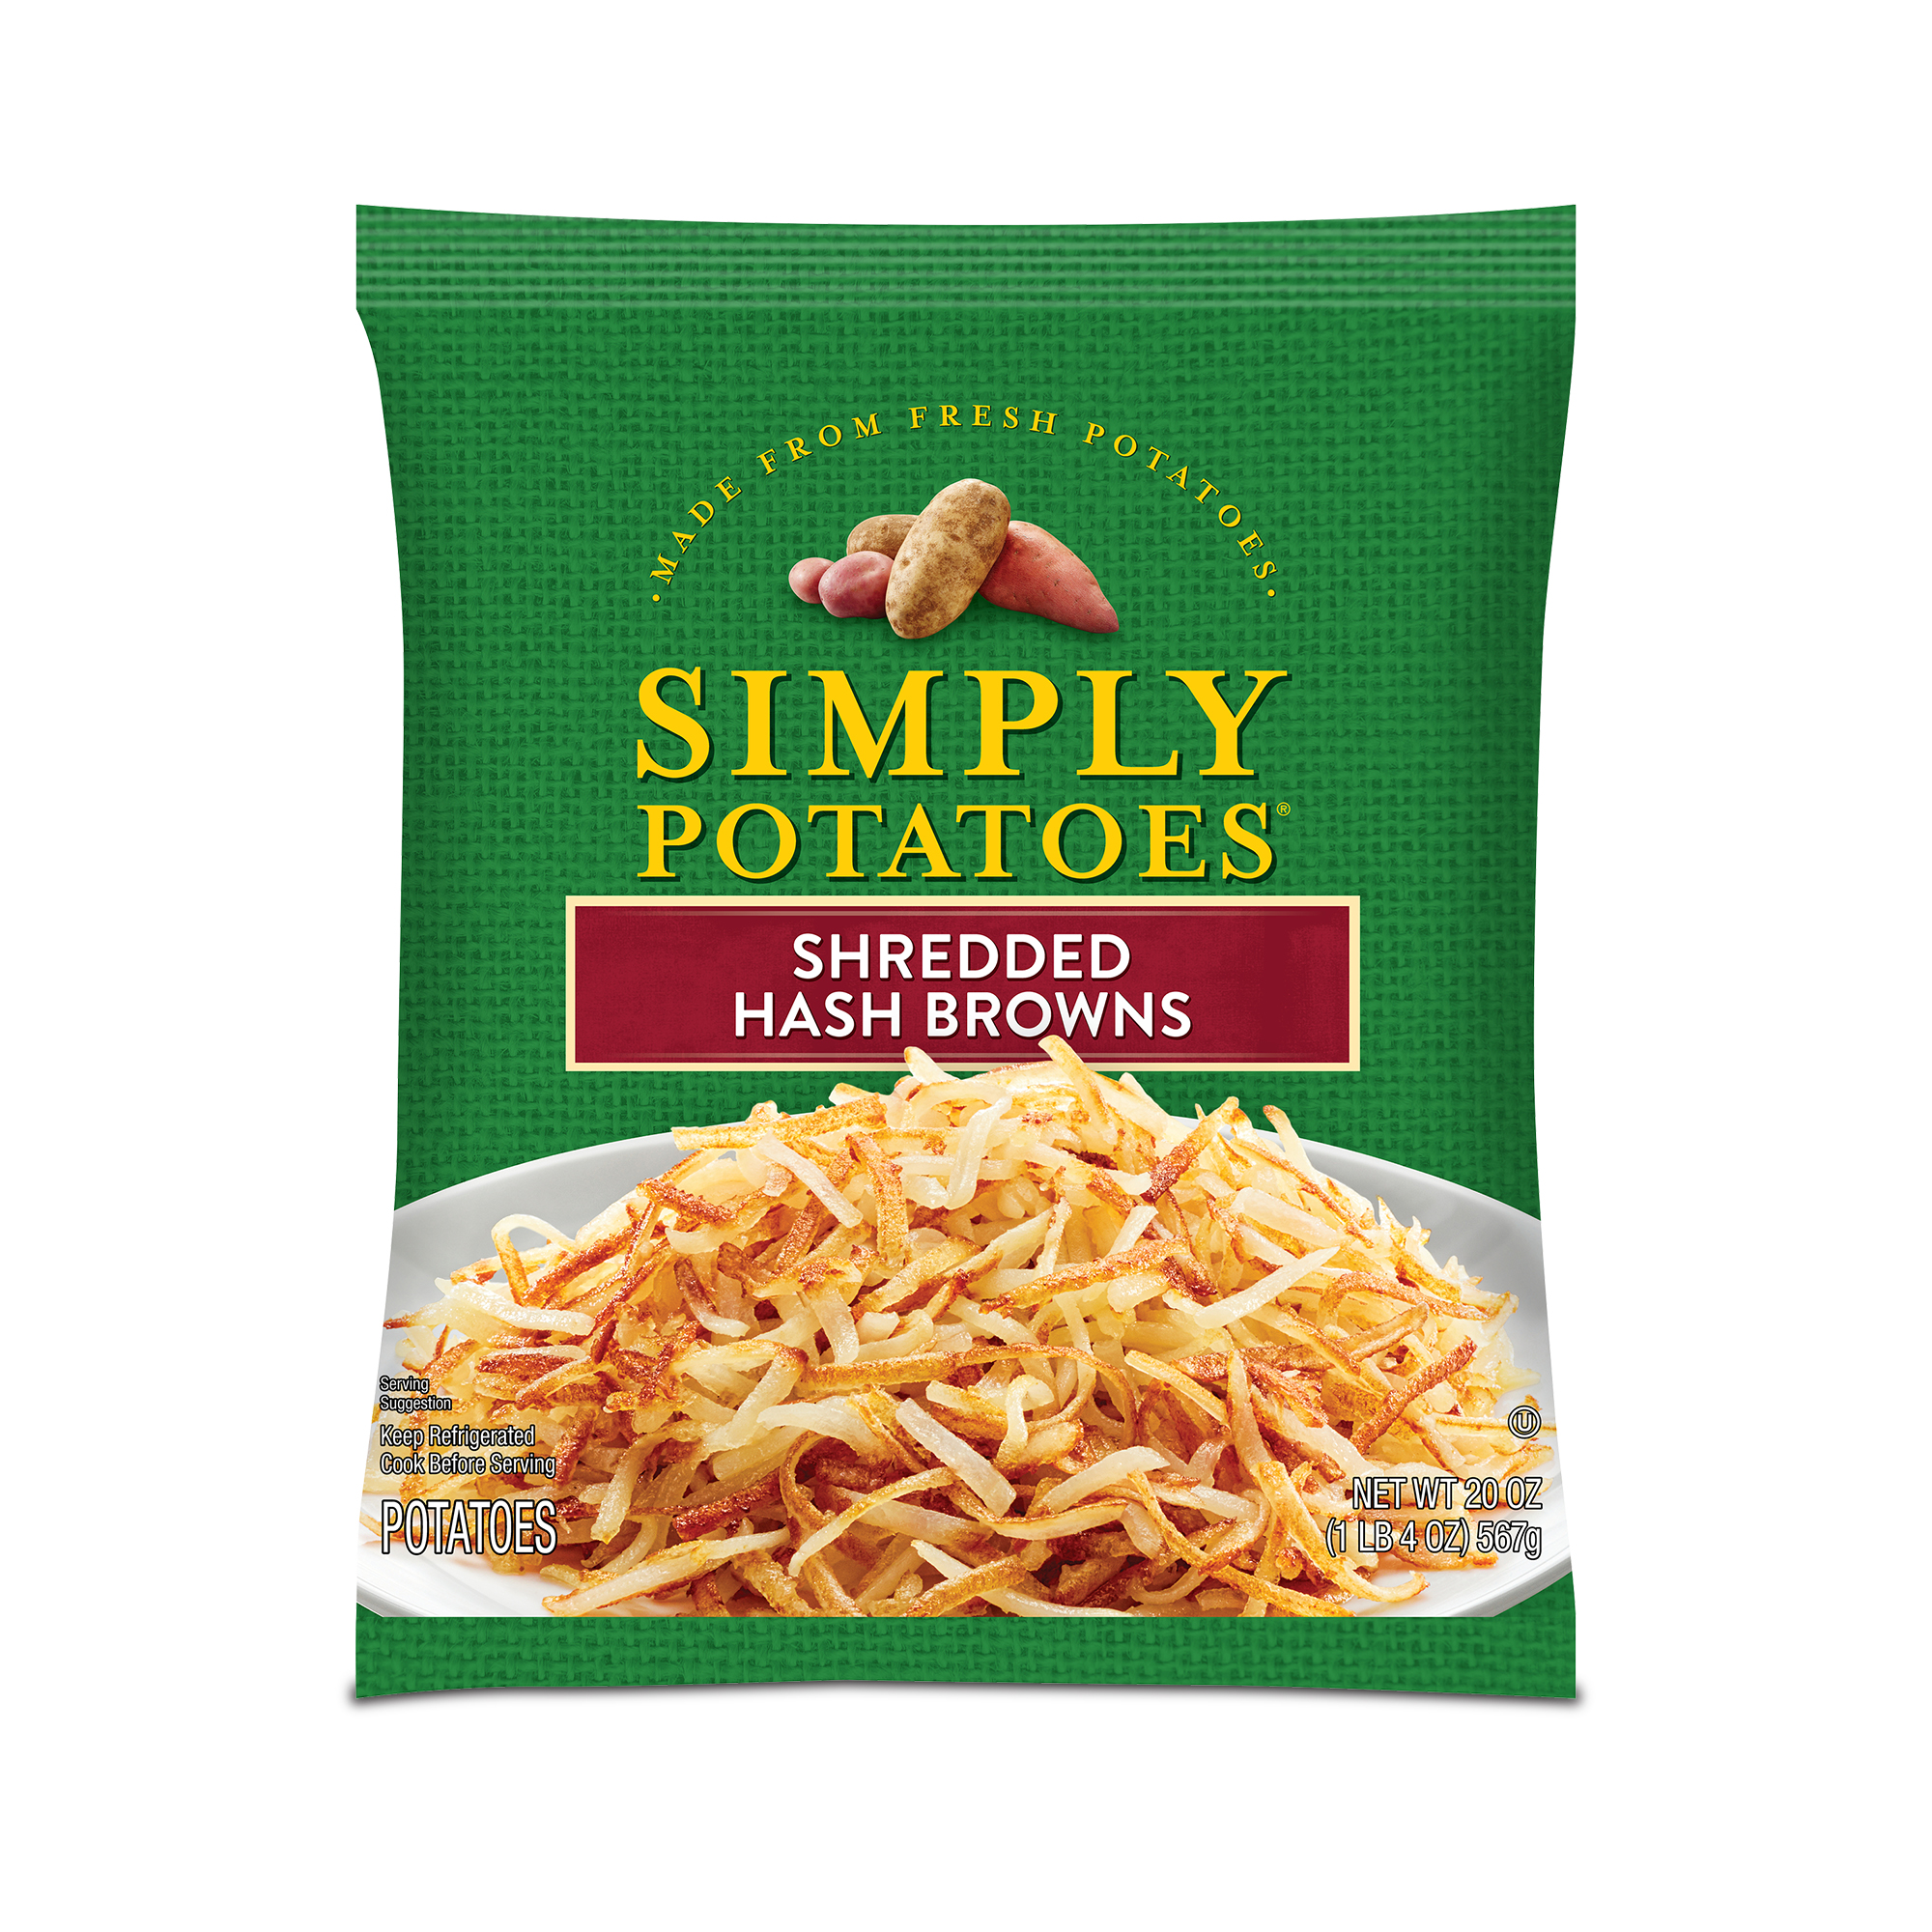 Simply Potatoes Gluten-Free Original Shredded Hash Browns, 20 oz Bag (Refrigerated) - image 1 of 8